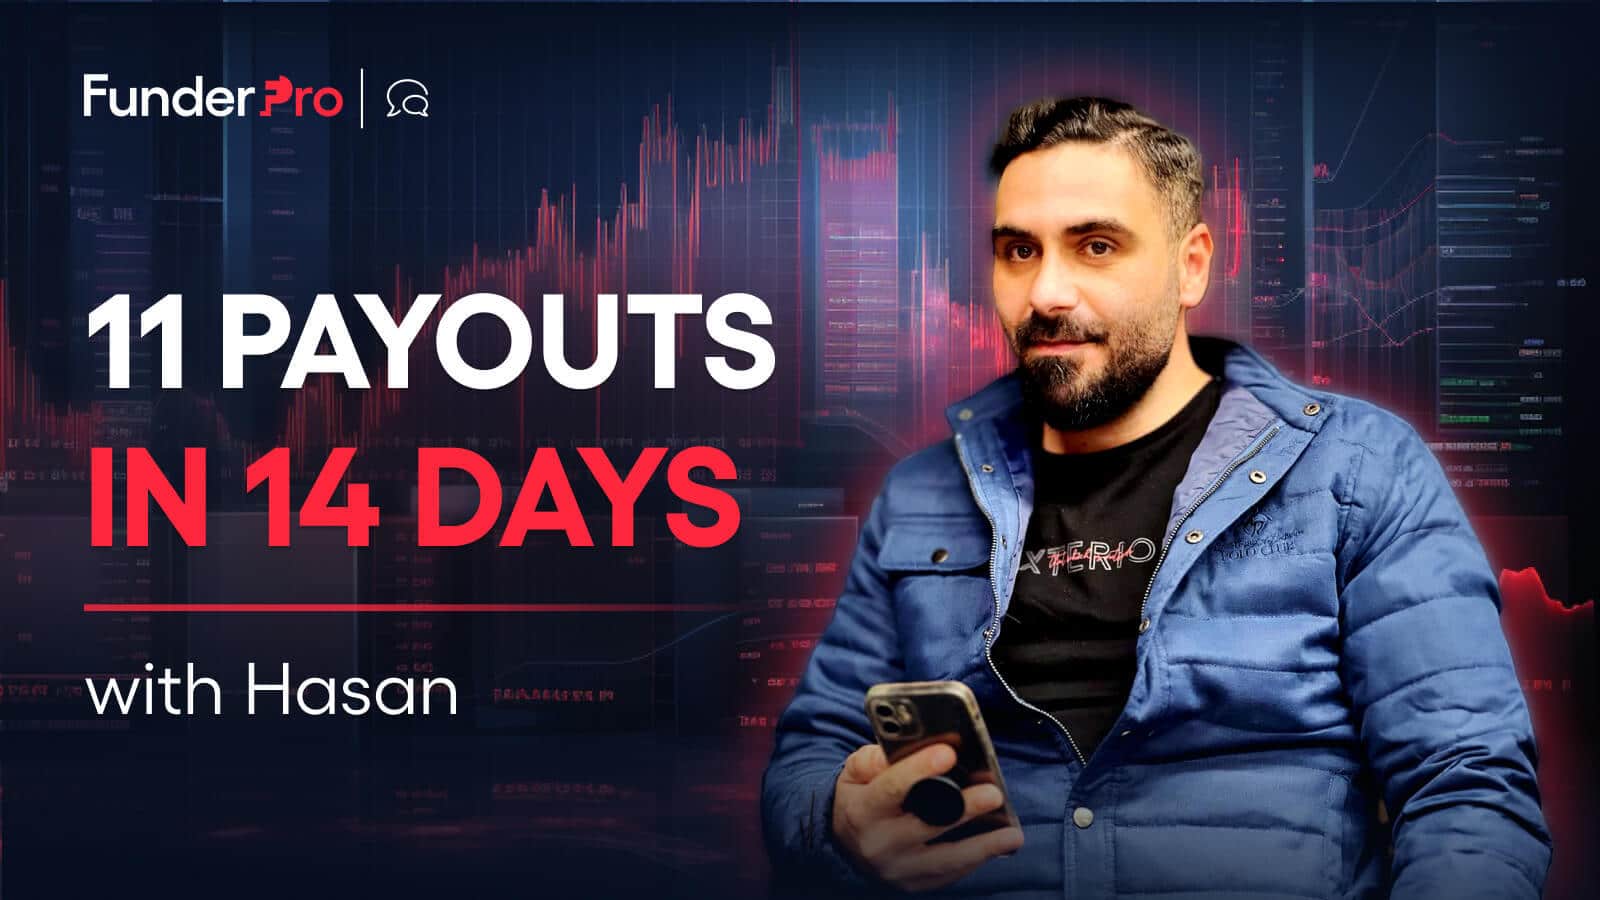 A picture of Hasan, who got 11 payouts in 14 days with FunderPro.